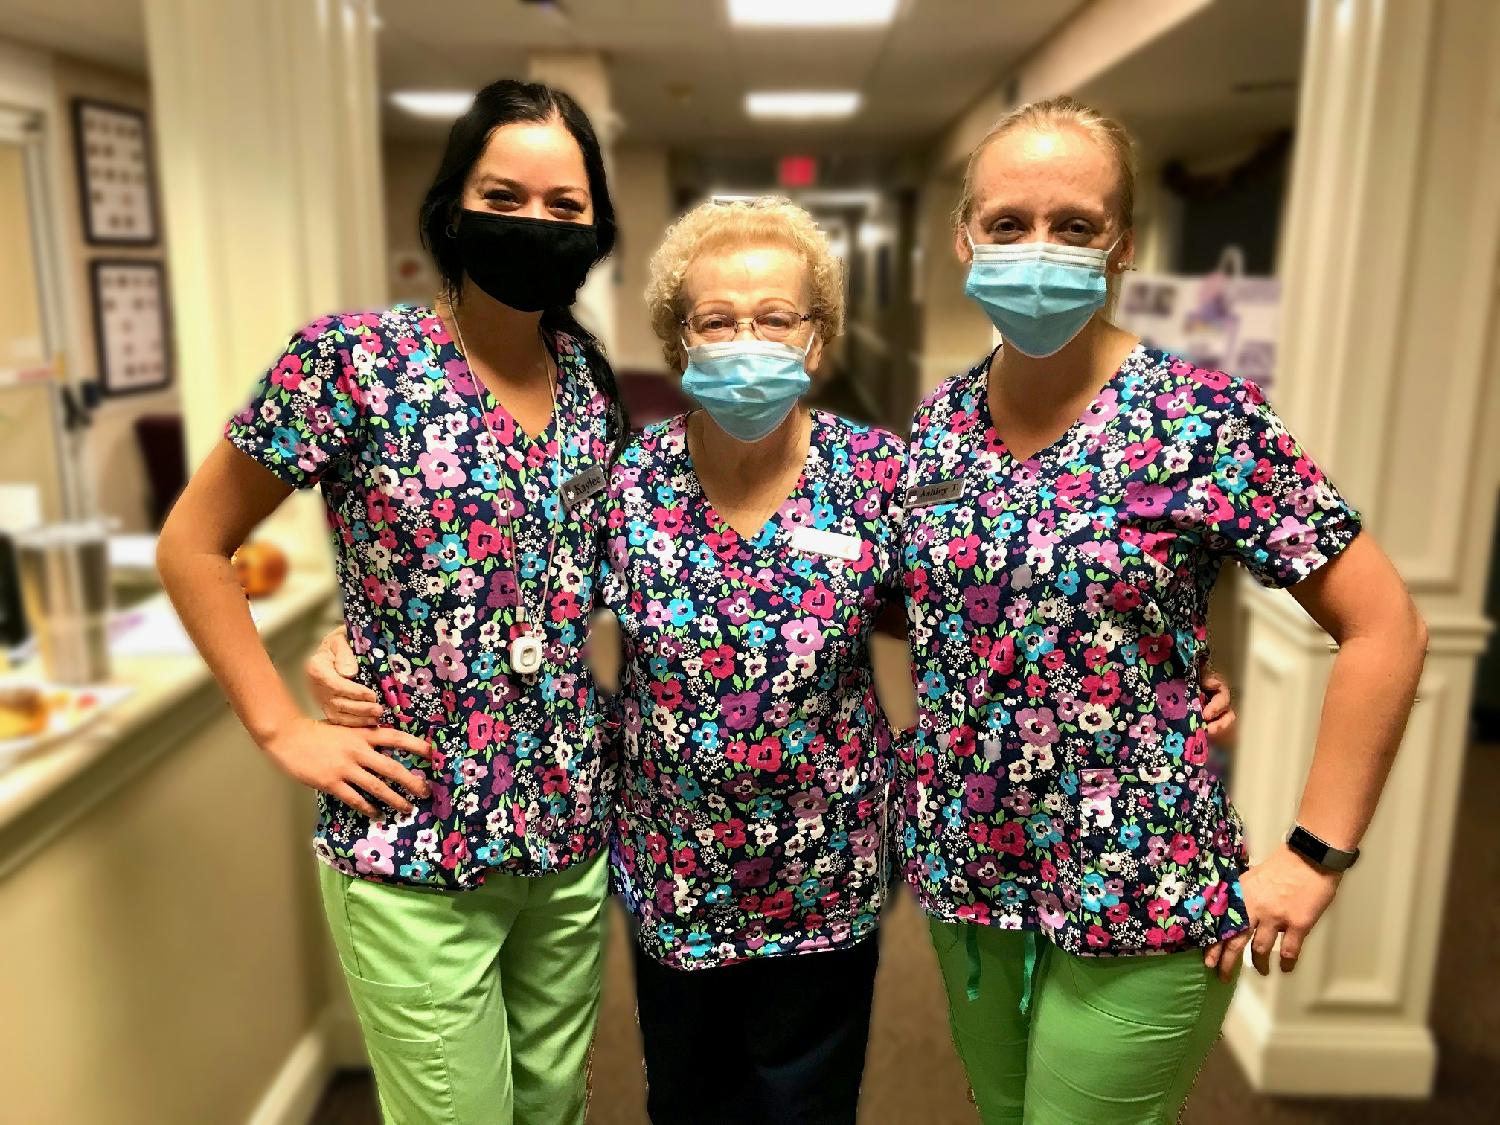 Our wonderful Resident Care Associates showing off their new scrubs!